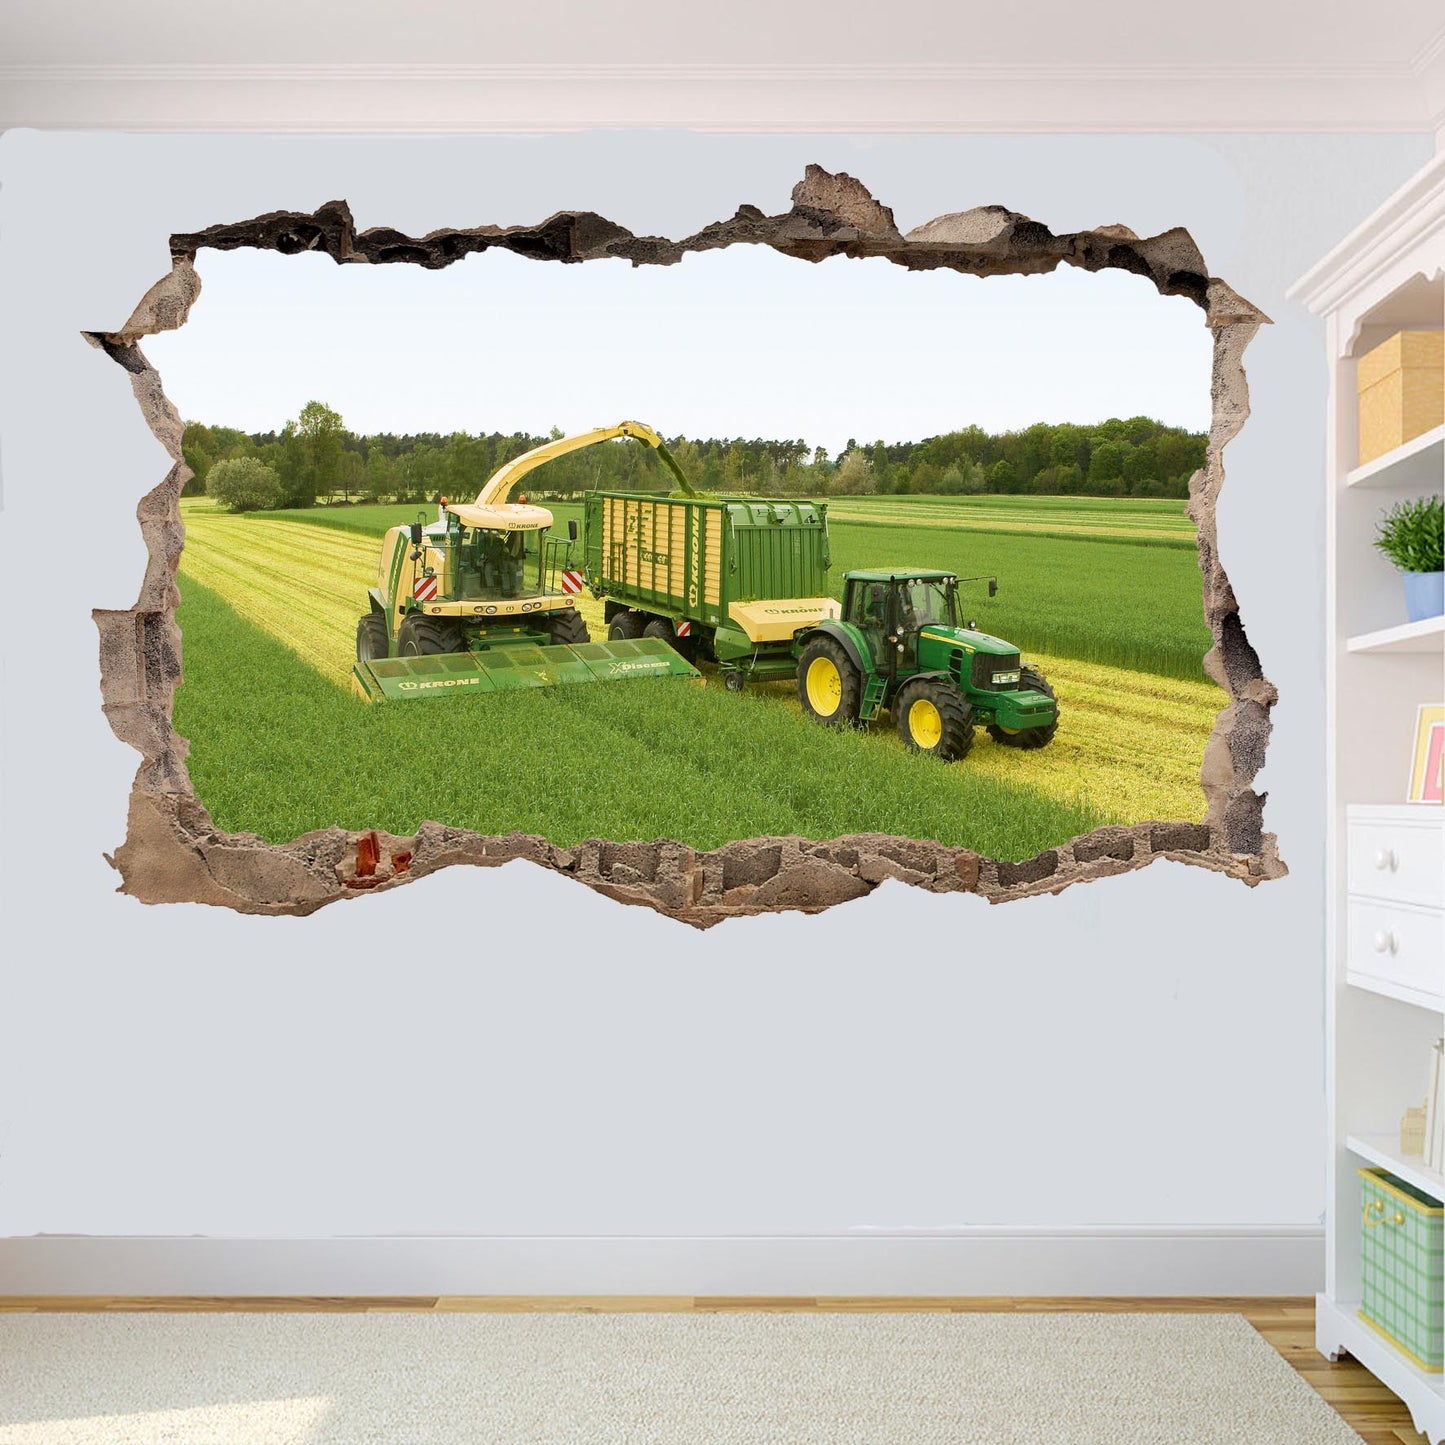 AGRICULTURAL MACHINERY KRONE AND JOHN DEERE TRACTOR COMBINE HARVESTER WALL STICKER